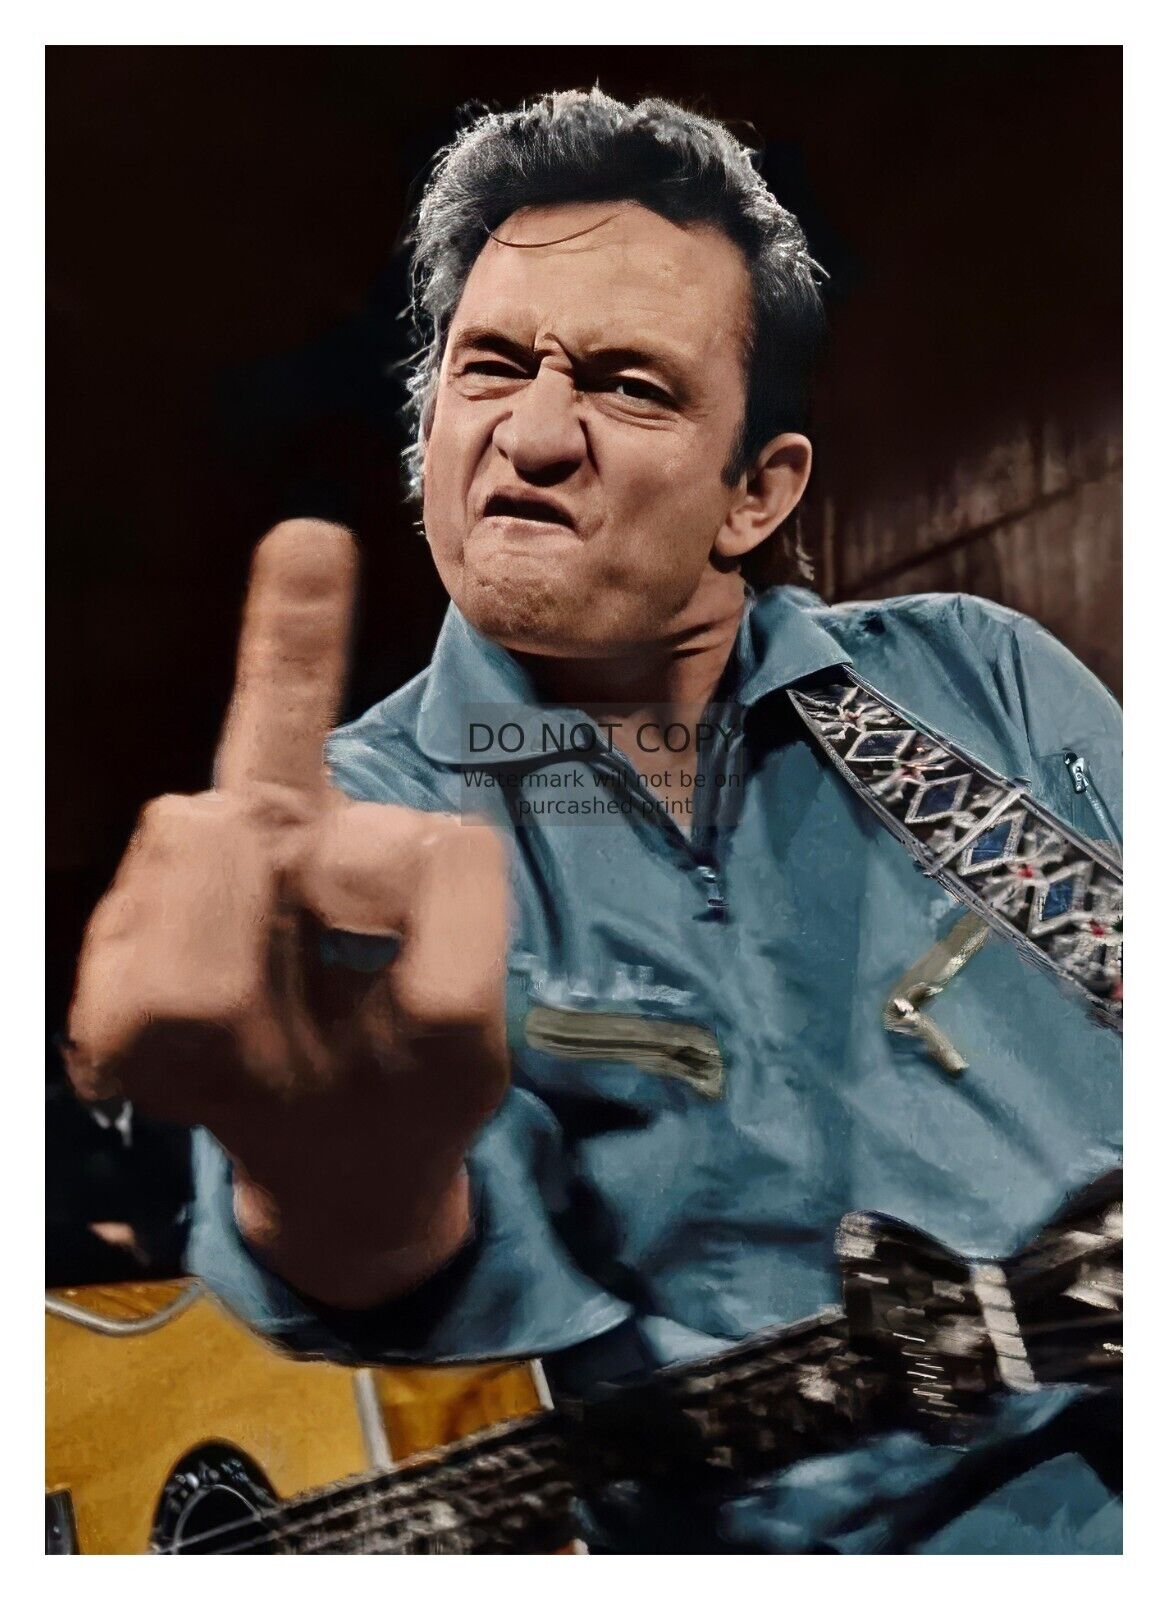 JOHHNY CASH FLIPPING THE BIRD TO THE CAMERA COUNTRY SINGER 5X7 COLORIZED PHOTO